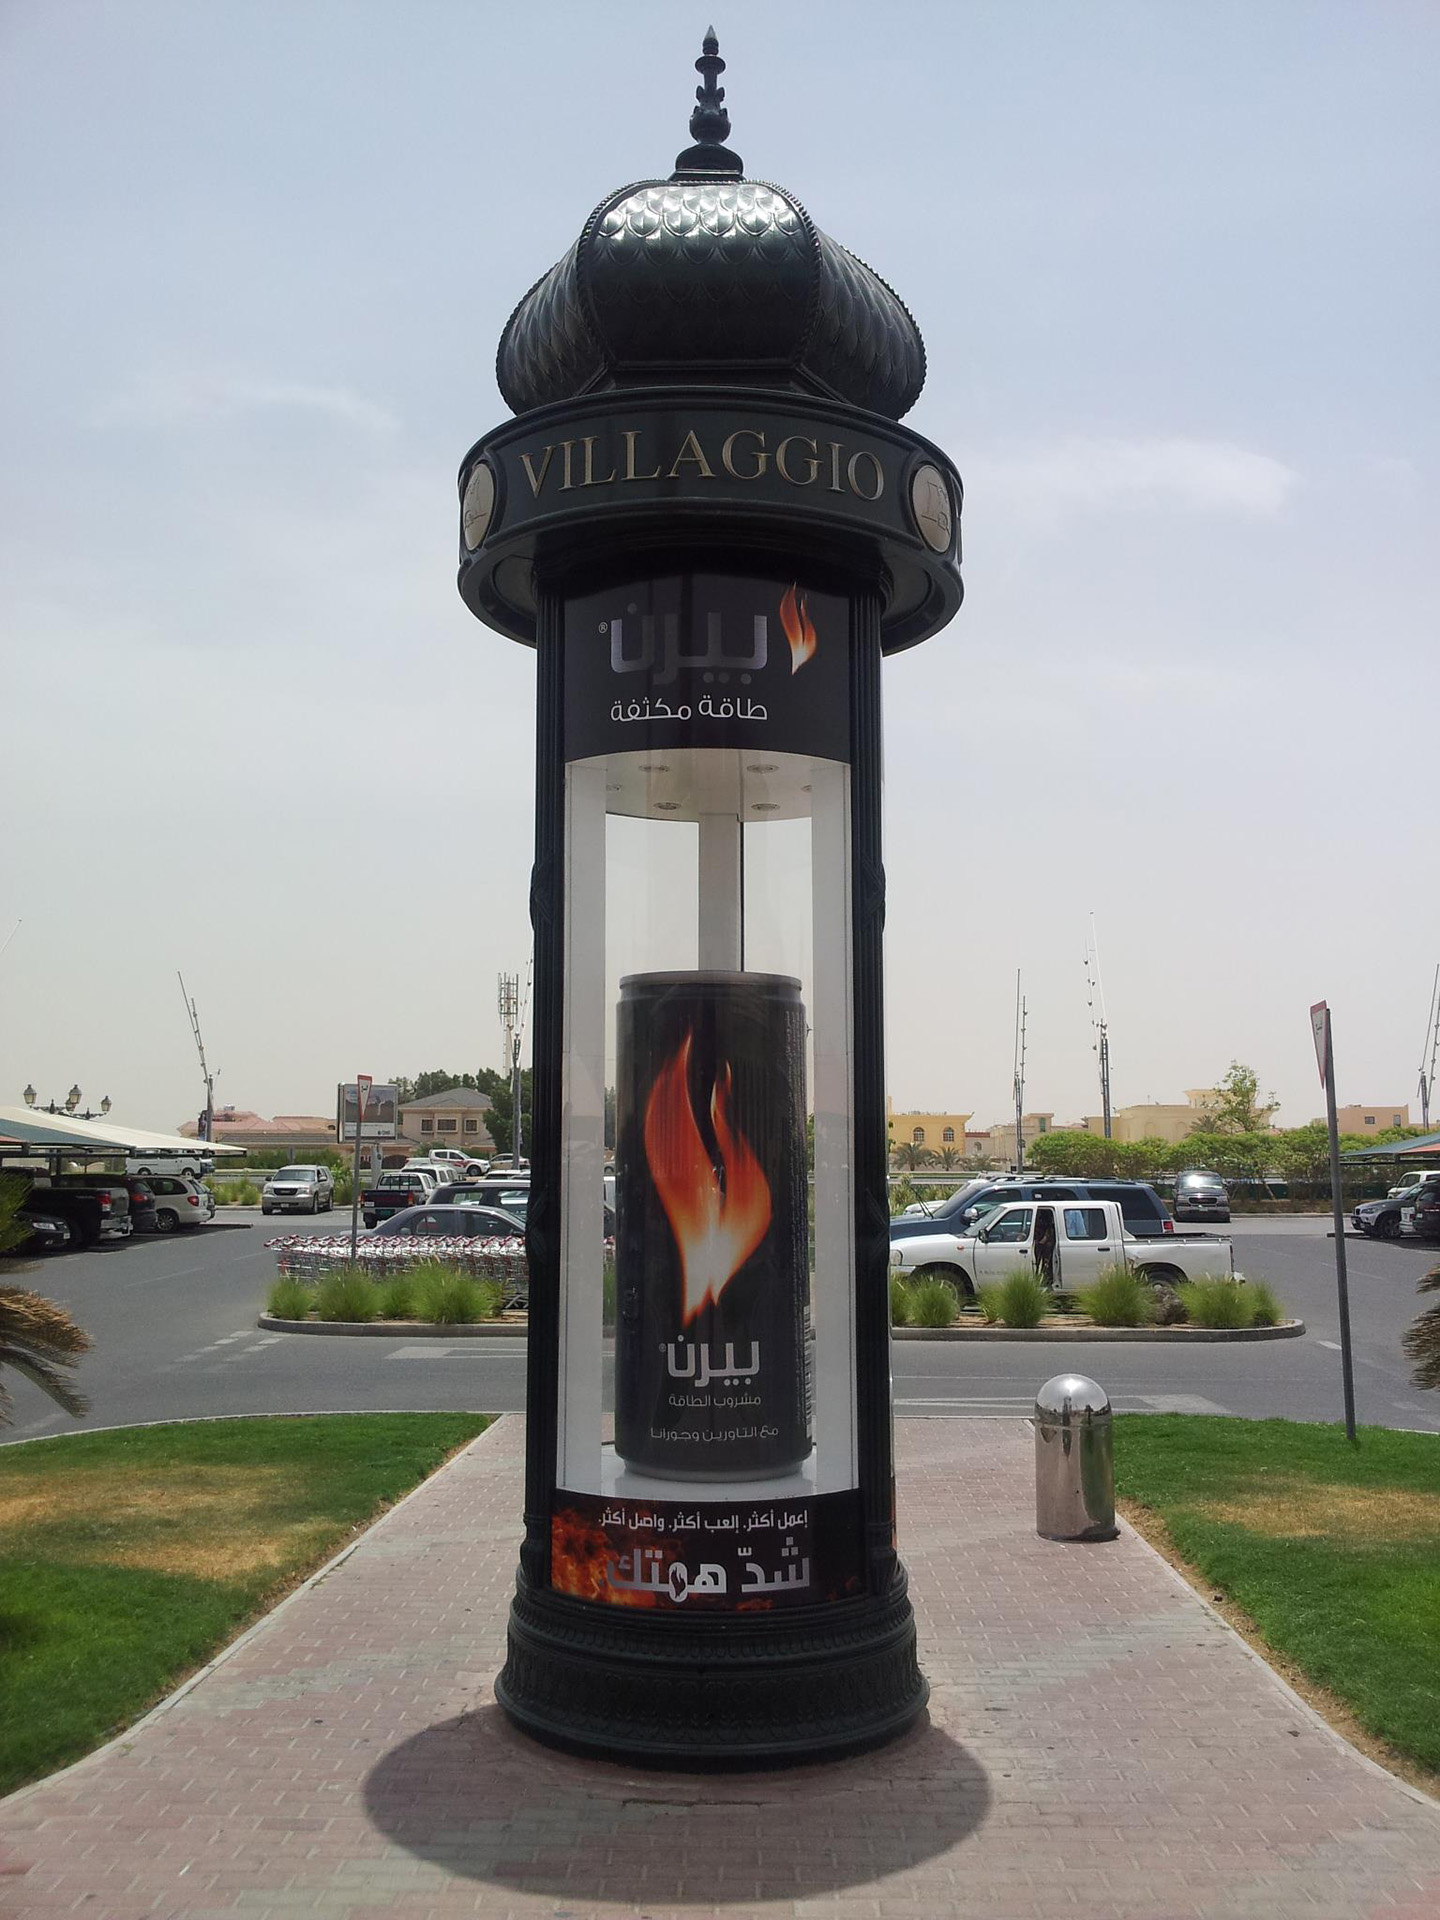 Huge Fiberglass Burn Energy Drink Can produced by ME Visual in Qatar